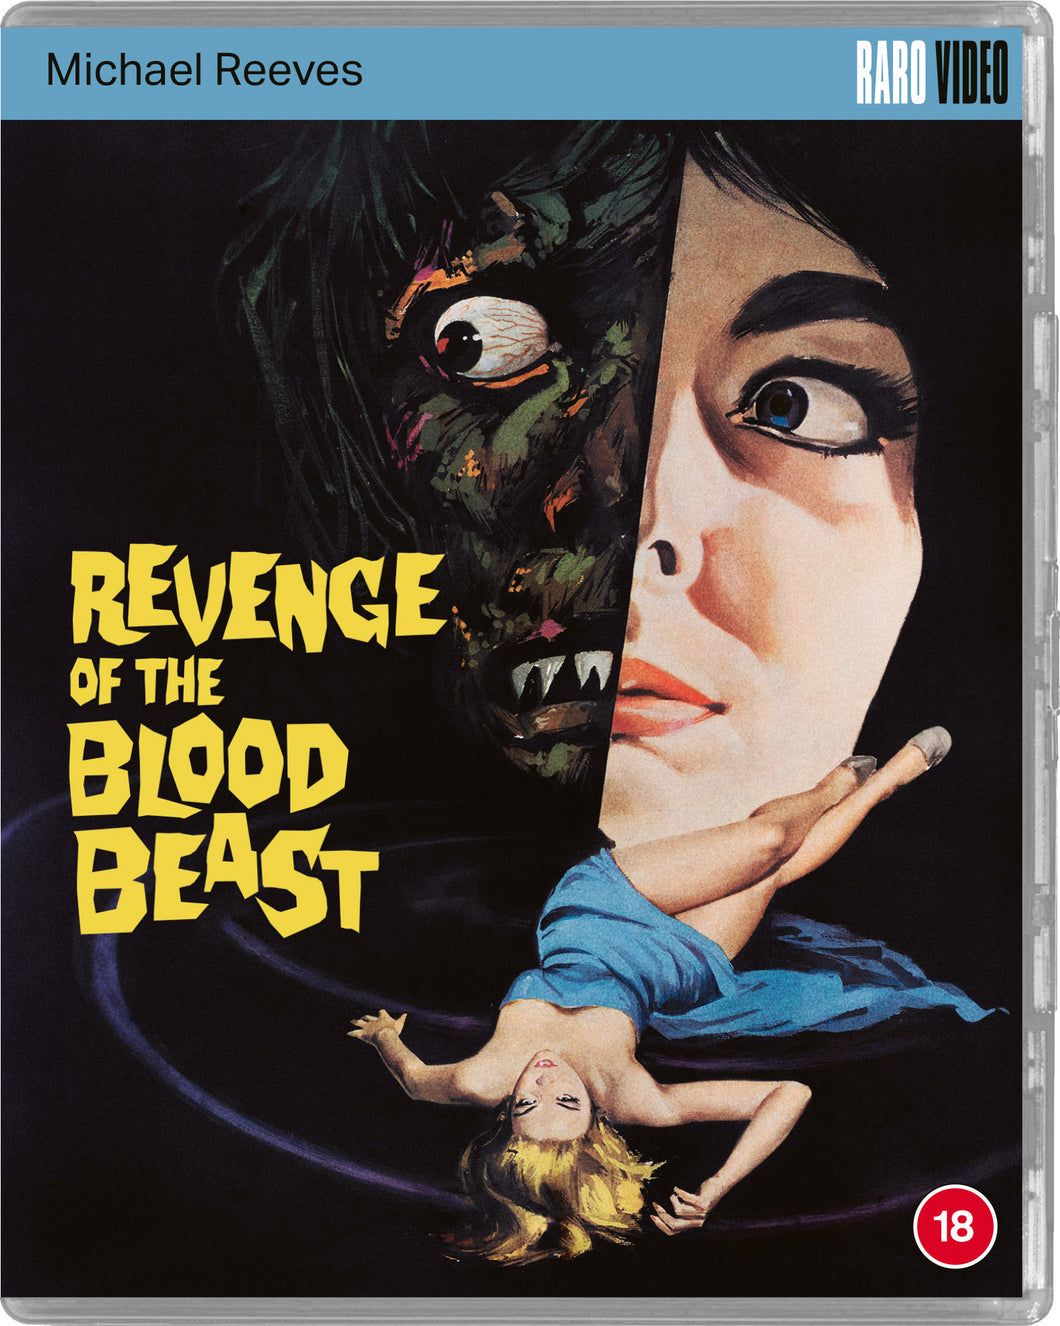 Revenge of the Blood Beast - front cover